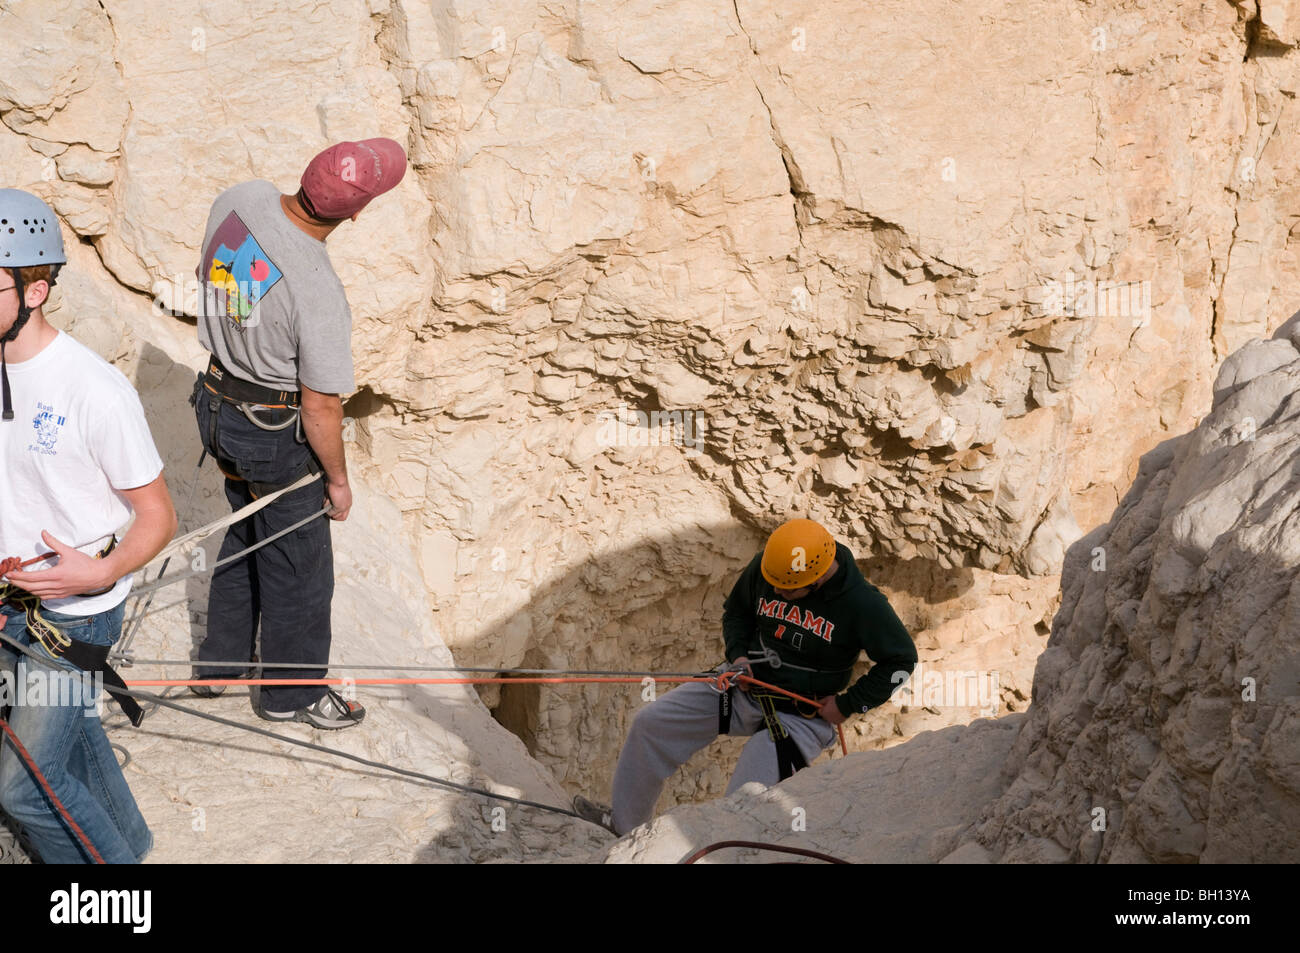 Israel, Dead Sea, Qumran, Group rappeling down a dry waterfall of the Qumran river Stock Photo